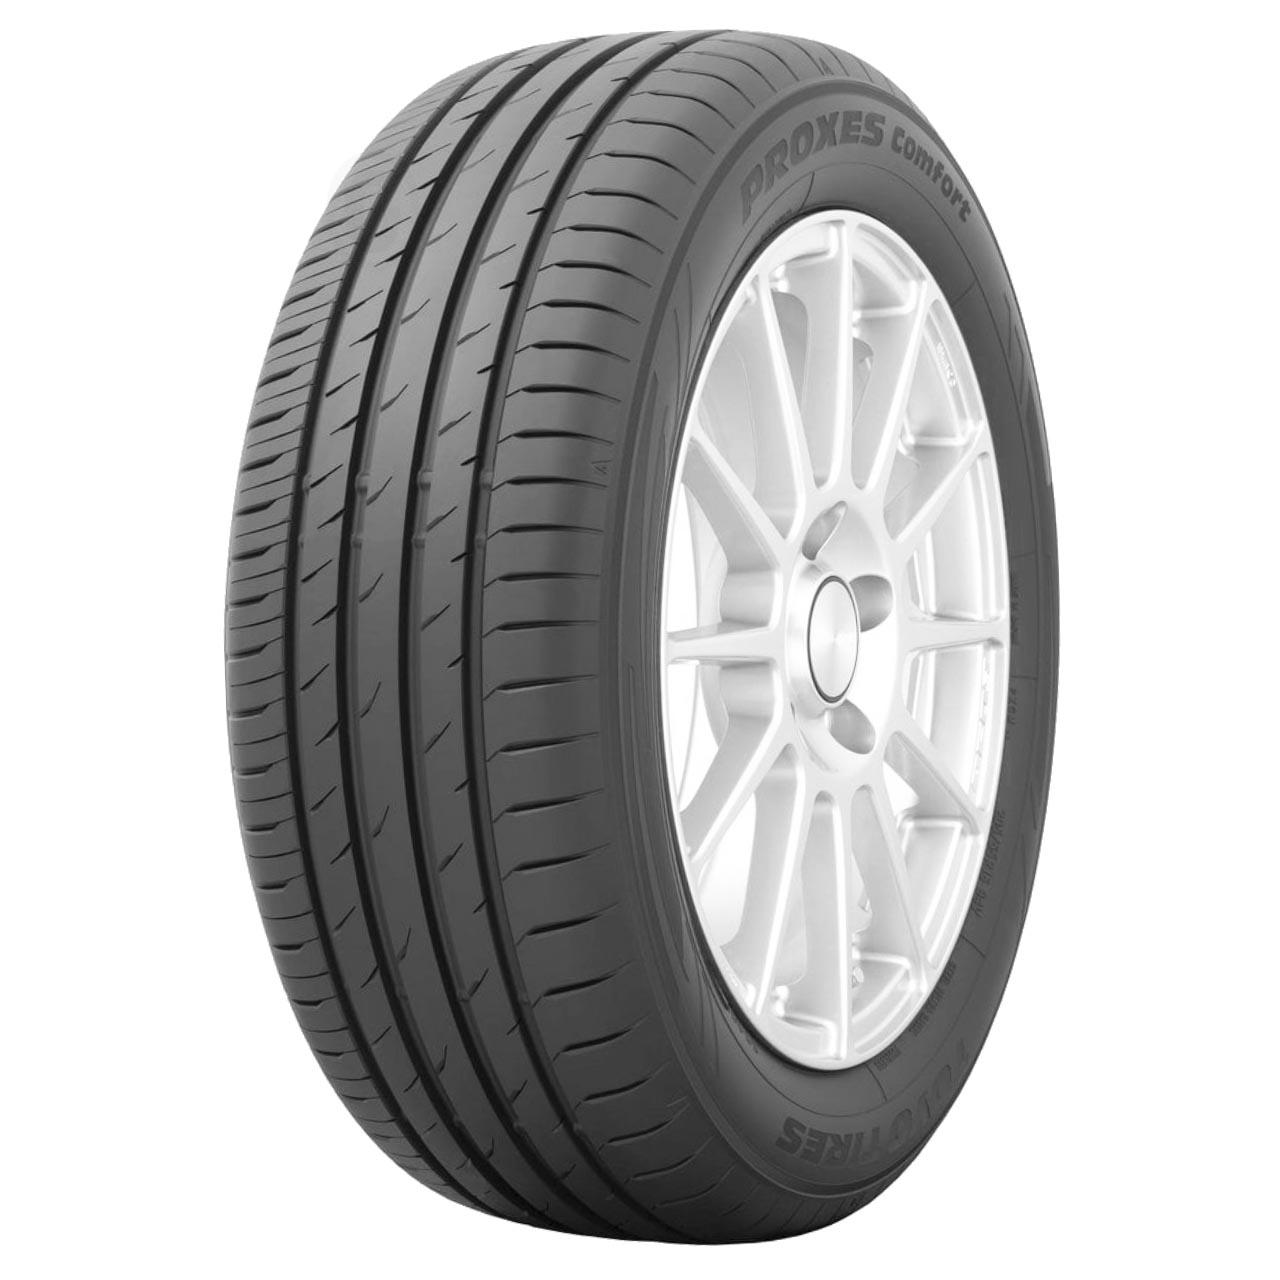 Toyo Proxes Comfort 225/55R18 102W XL